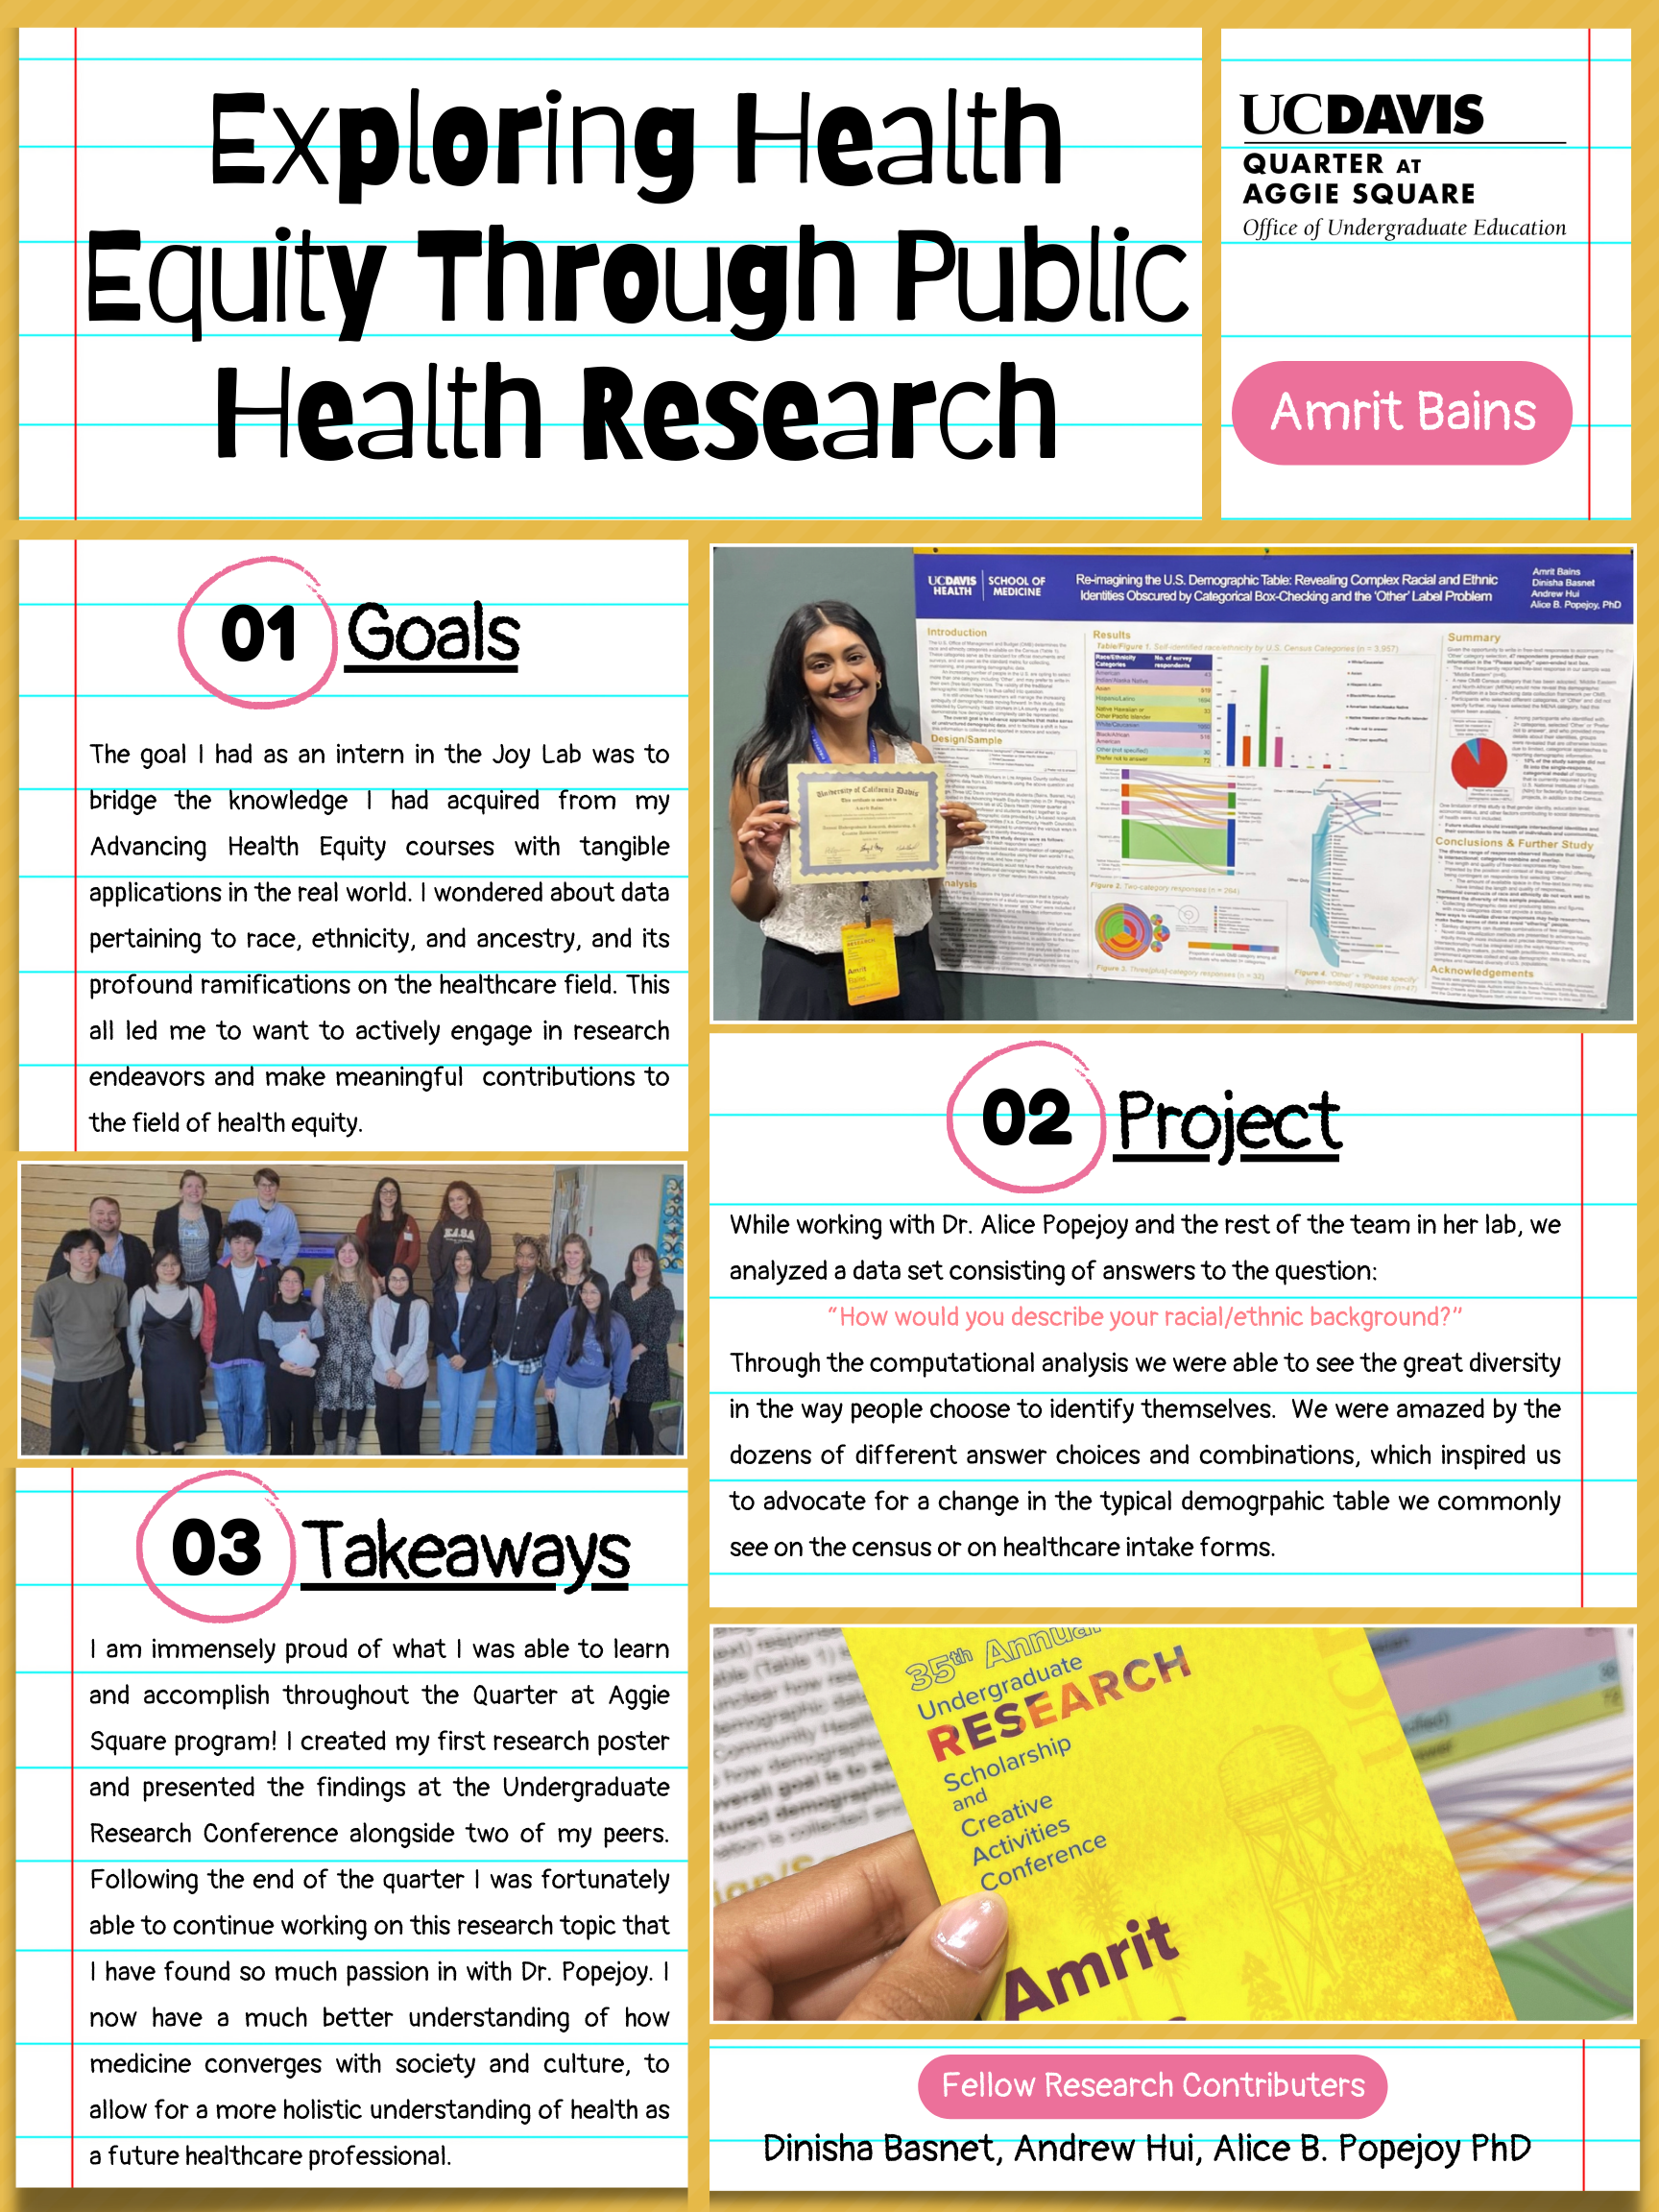 Project poster by Amrit Bains on exploring health equity through public health research. It features goals of a project for examining how to think about race/ethnicity data and takeaways through the research poster on the subject on how a more holstic approach can help with health equity.